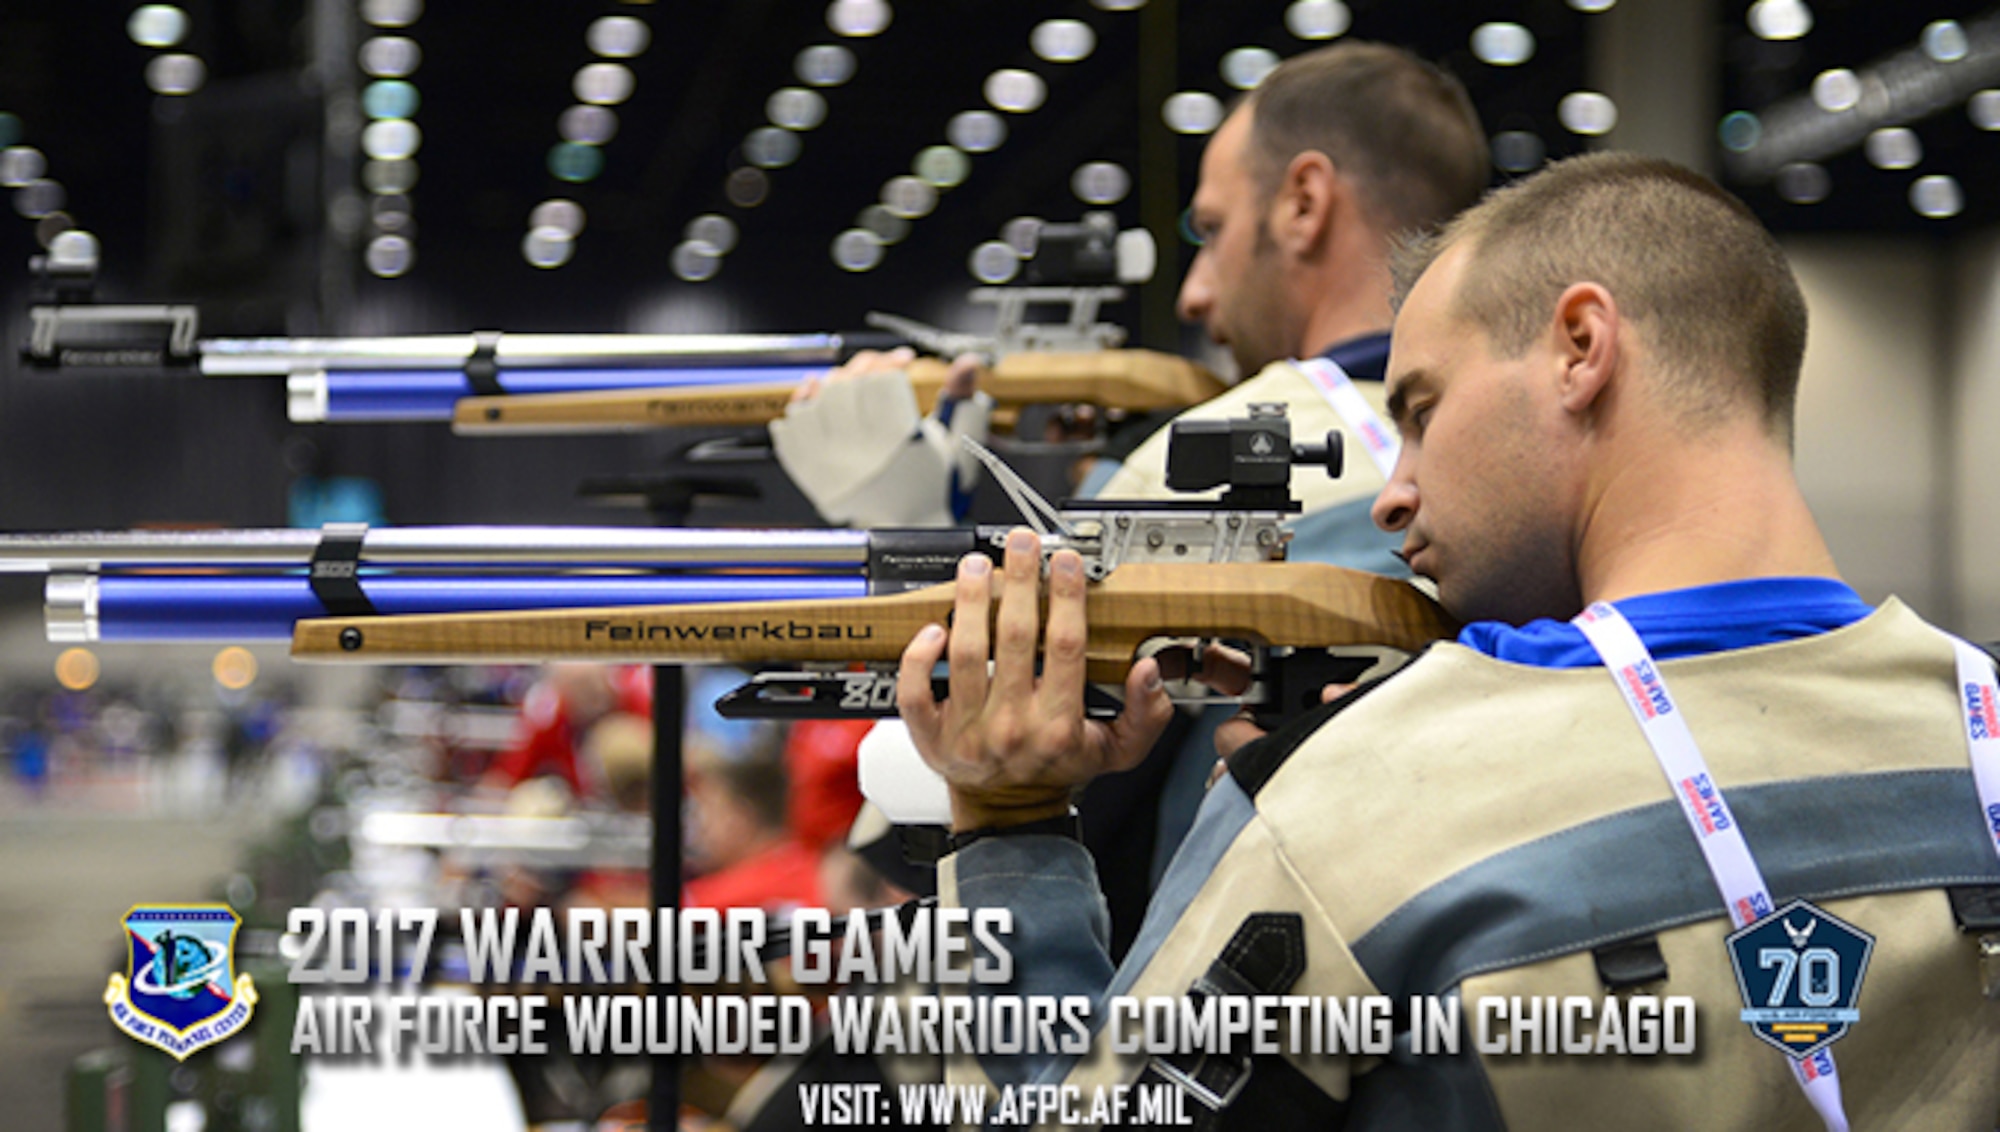 U.S. Air Force 2nd Lt. Ryan Novack [front], a munitions and missile maintenance officer from Aurora, Ill., and U.S. Air Force Reserve Tech. Sgt. Jett Blackwell [rear], a fuels technician from Bethany, Okla., take part in a practice shoot session in preparation for the 2017 Warrior Games June 29, 2017 at McCormick Place-Lakeside Center, Chicago, Ill. The Warrior Games were established in 2010 to enhance the recovery and rehabilitation process of wounded warriors, while exposing them to adaptive sports. (U.S. Air Force photo by Staff Sgt. Alexx Pons)